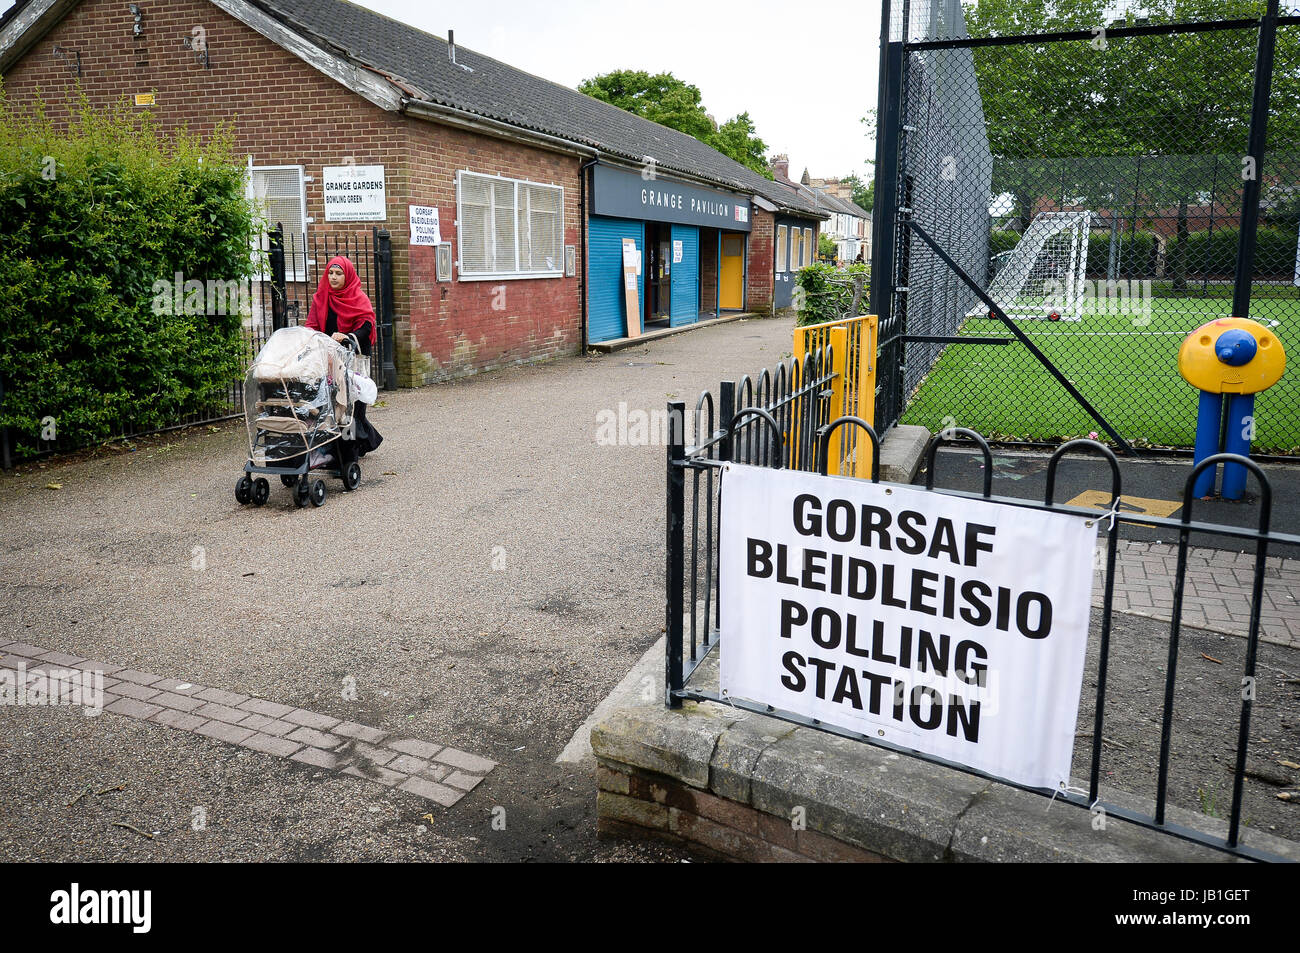 The Grange Pavilion bowling club, which is a polling station in Grangetown, Cardiff, as voters head to the polls across the UK to vote in the General Election. Stock Photo